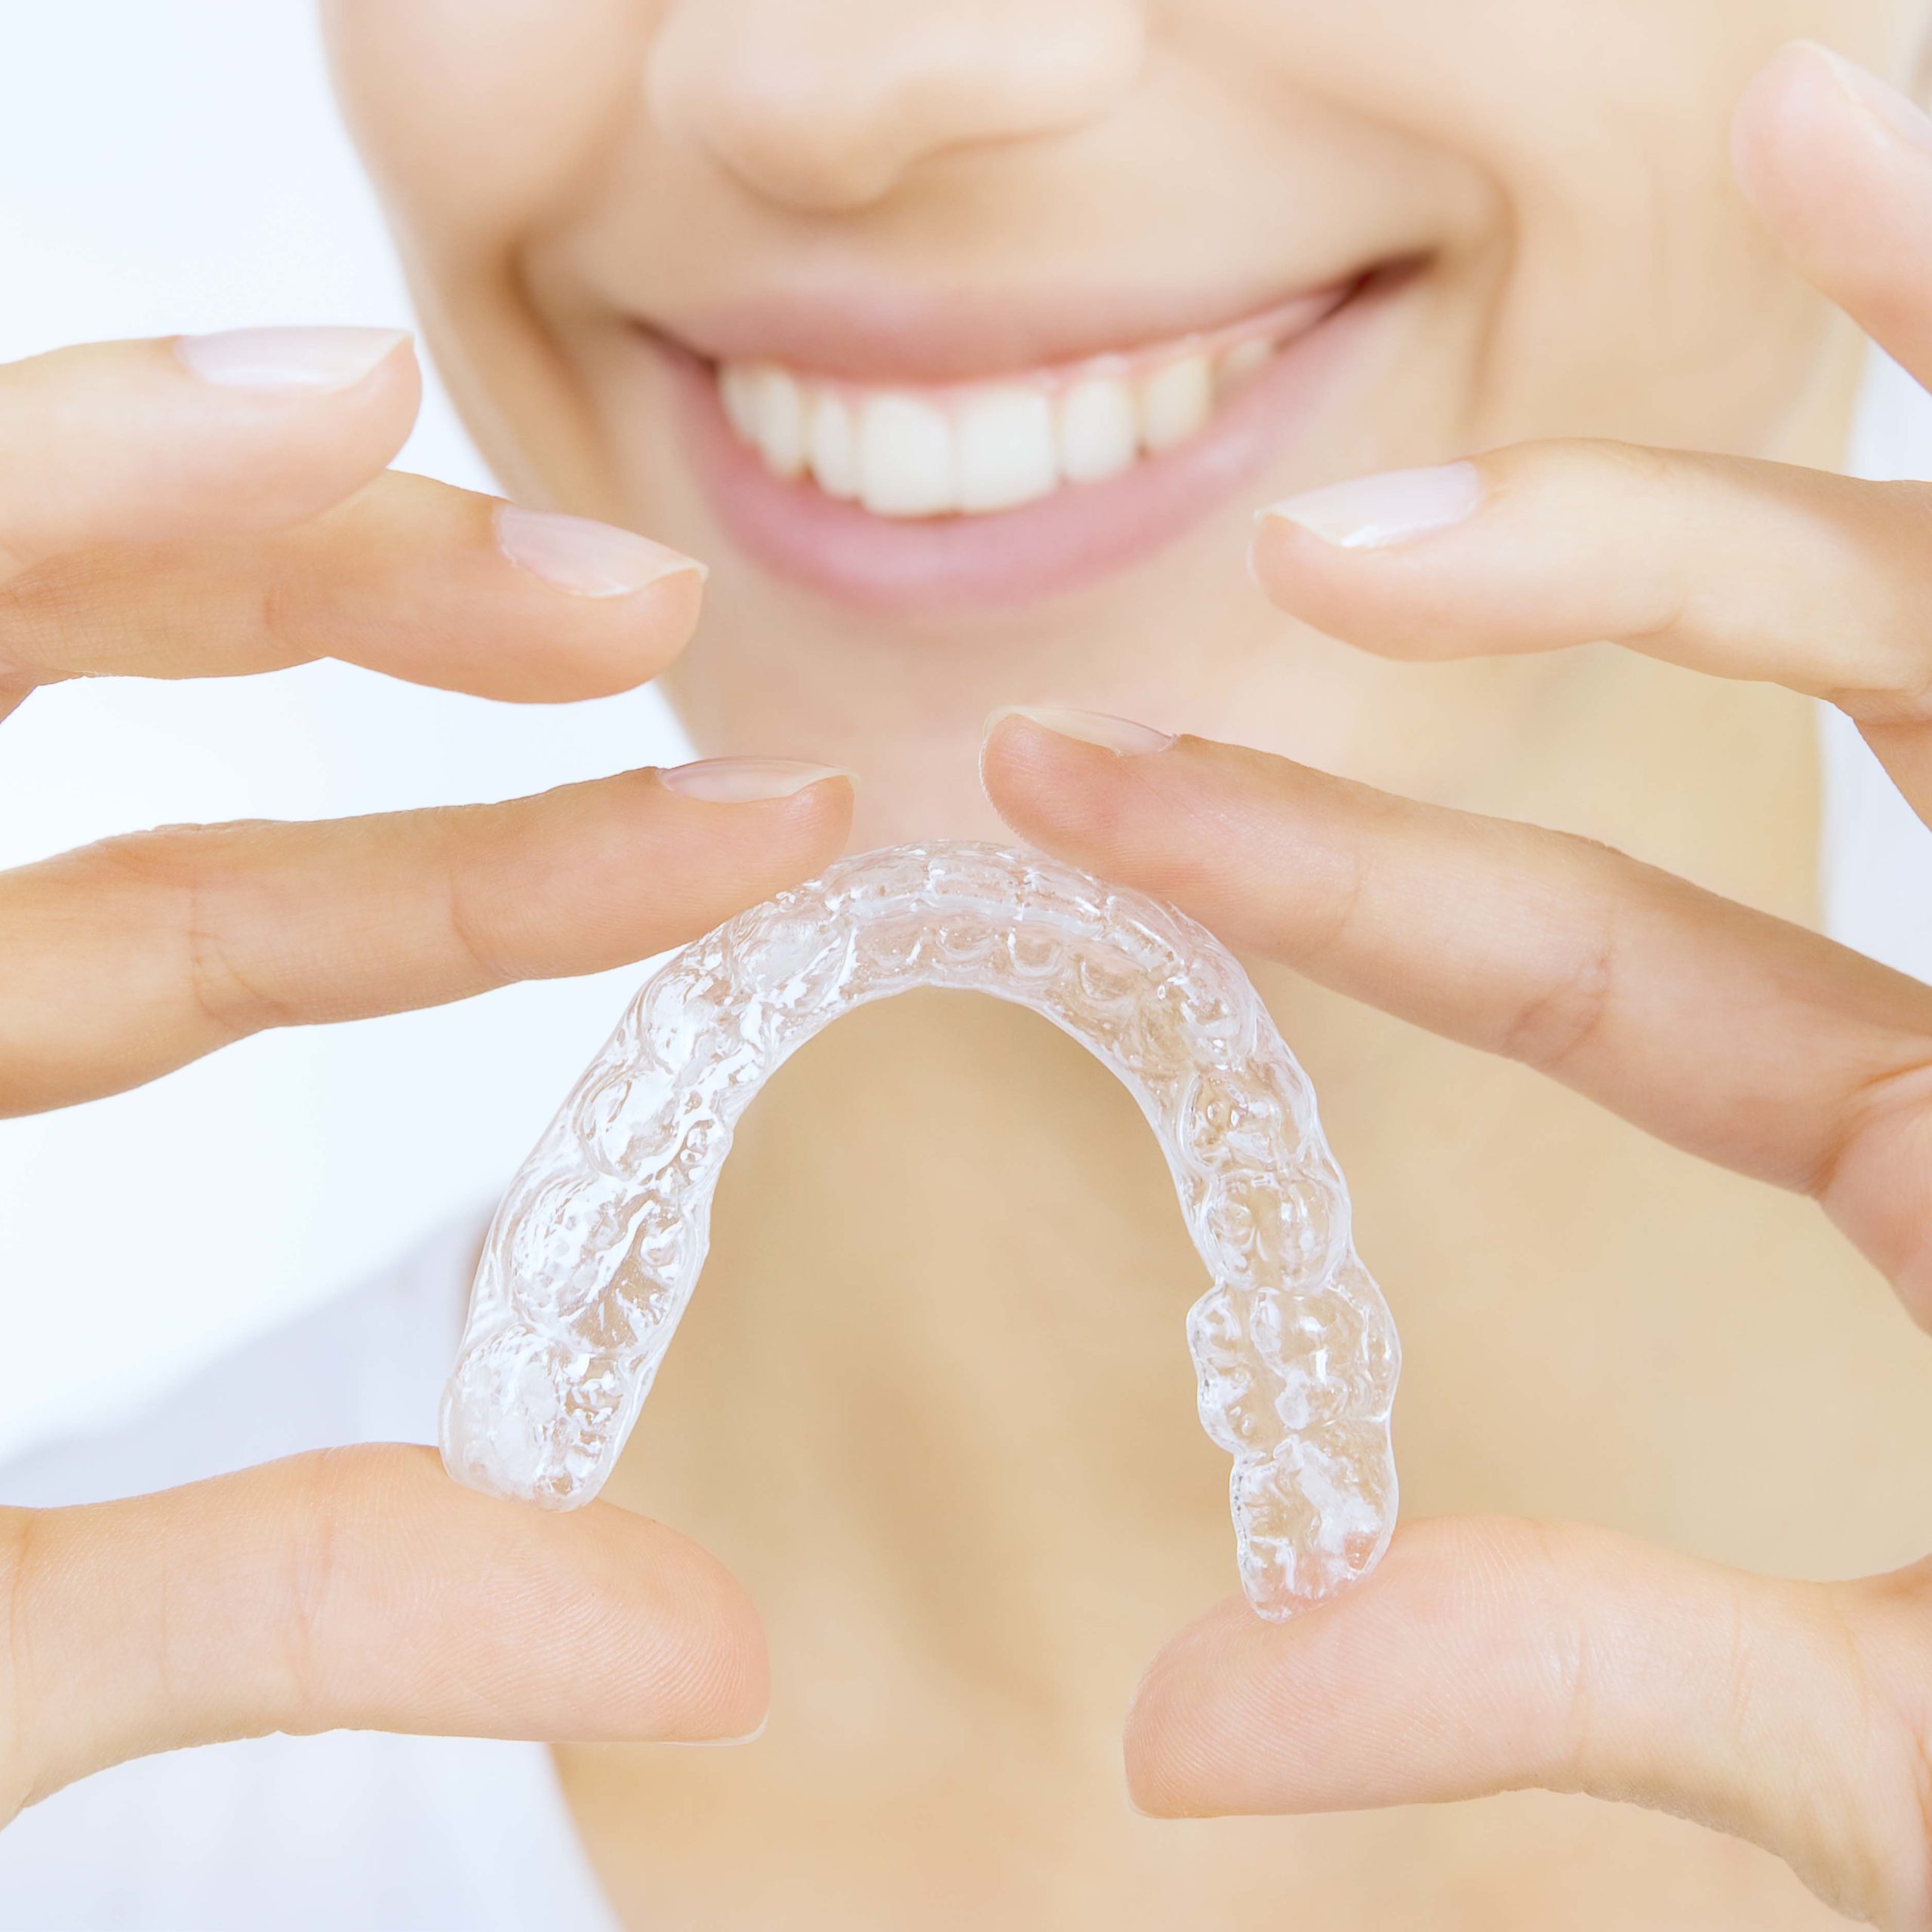 Plan your holidays while wearing Invisalign.